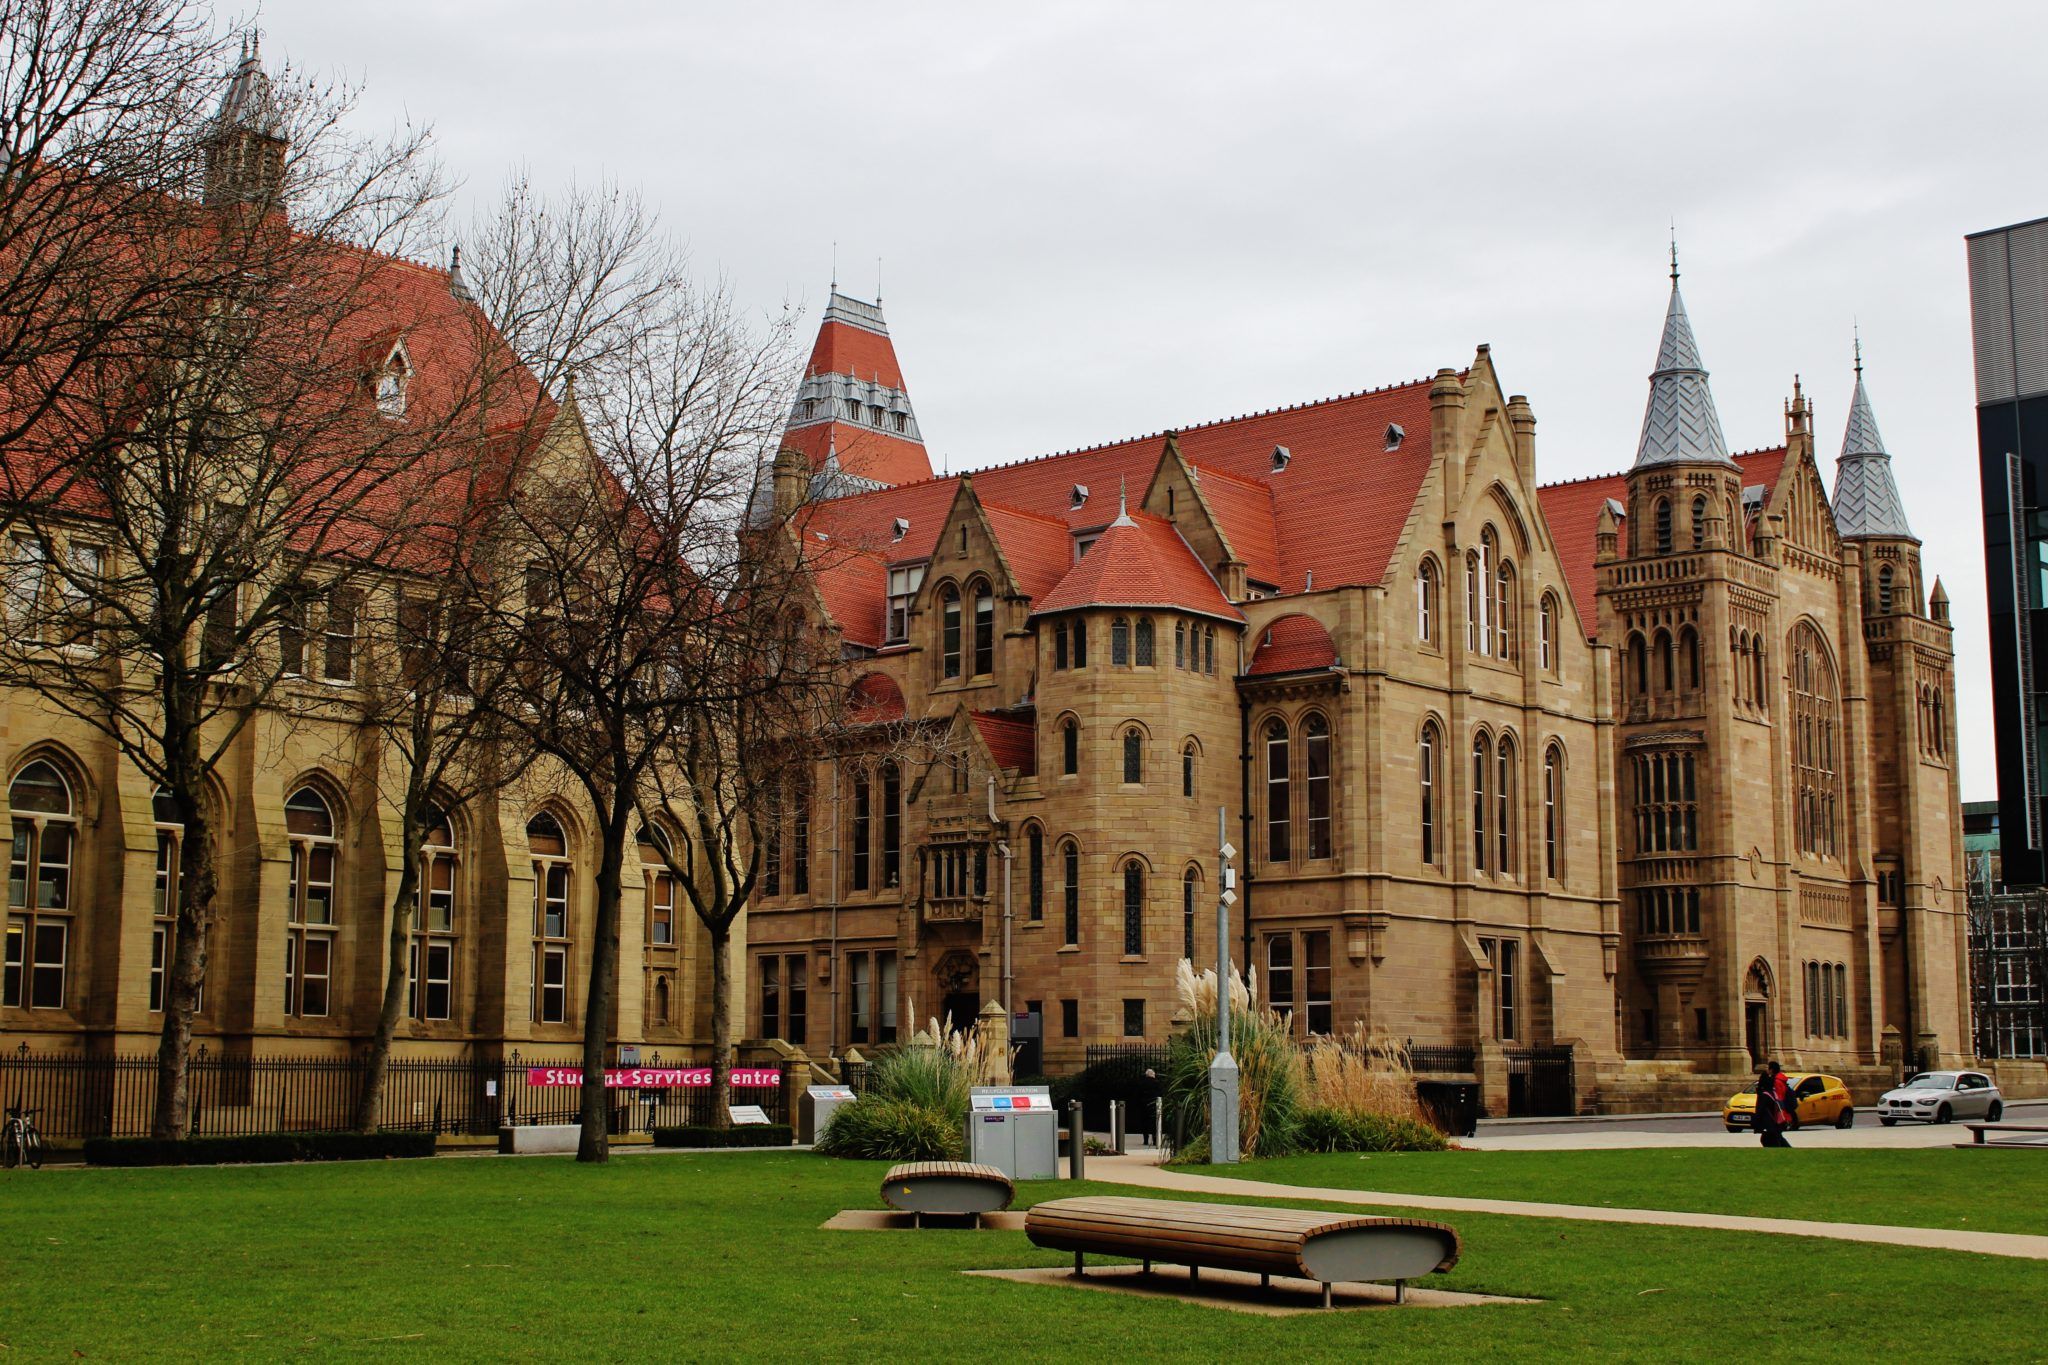 University of Manchester Campus
